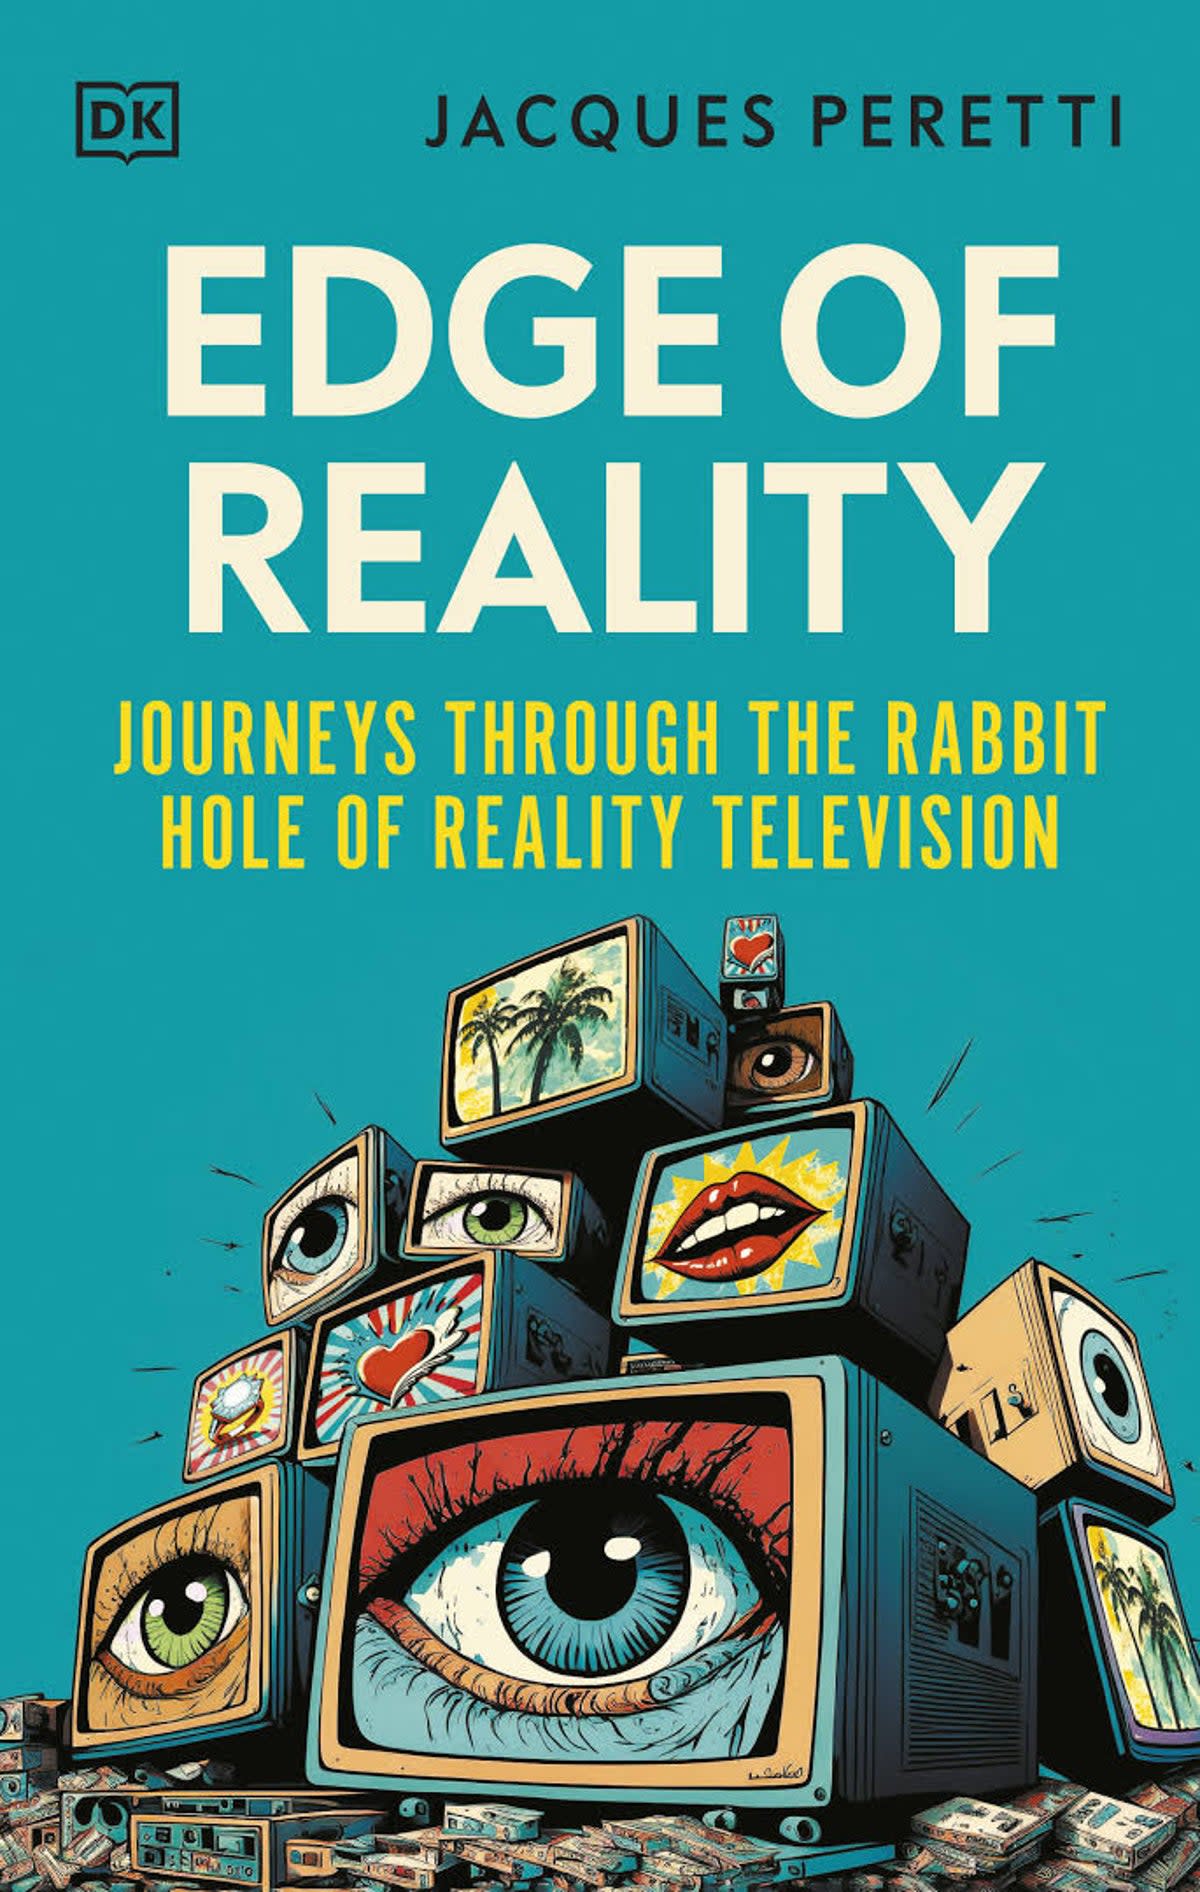 The focus of Jacques Peretti’s ‘Edge of Reality’ is the industry’s hidden mechanics – the ‘tricks of the trade’, as the author puts it (Dorling Kindersley Ltd)